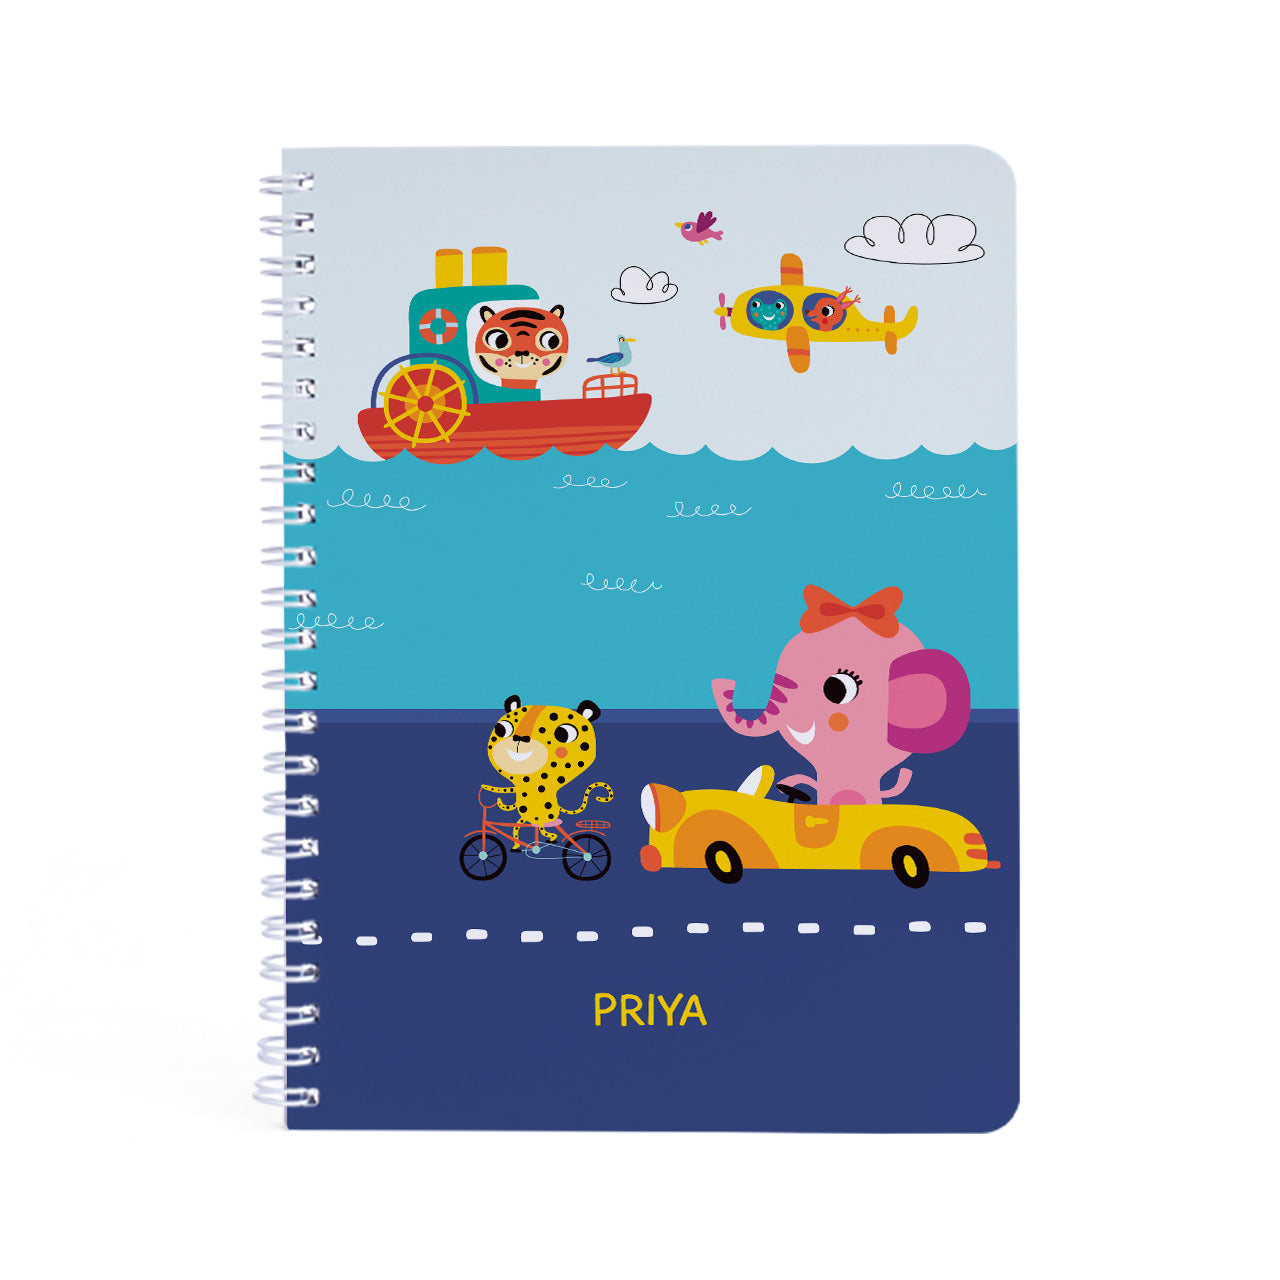 Personalised Spiral Notebook - Let's Travel